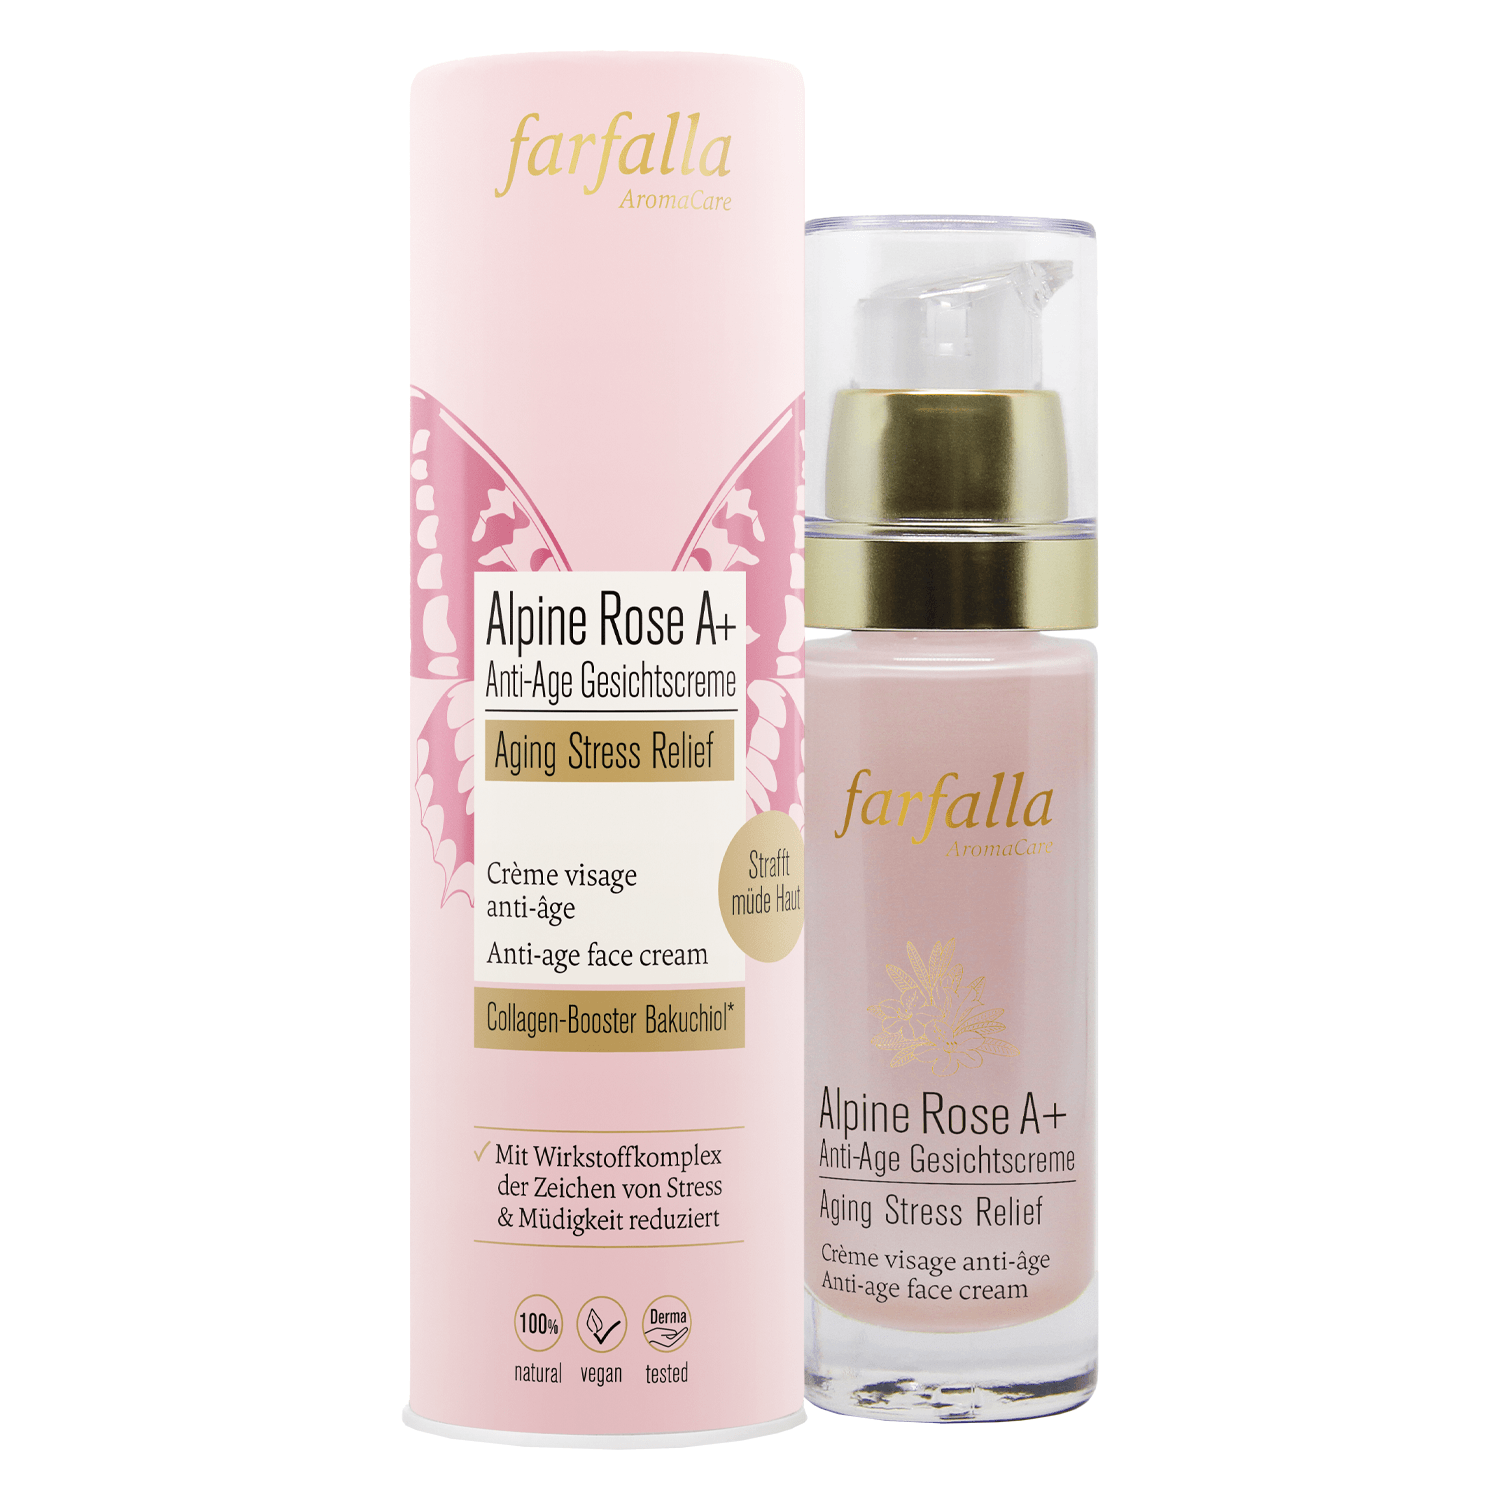 Product image from Farfalla Care - Alpine Rose A+ Anti-Age Gesichtscreme